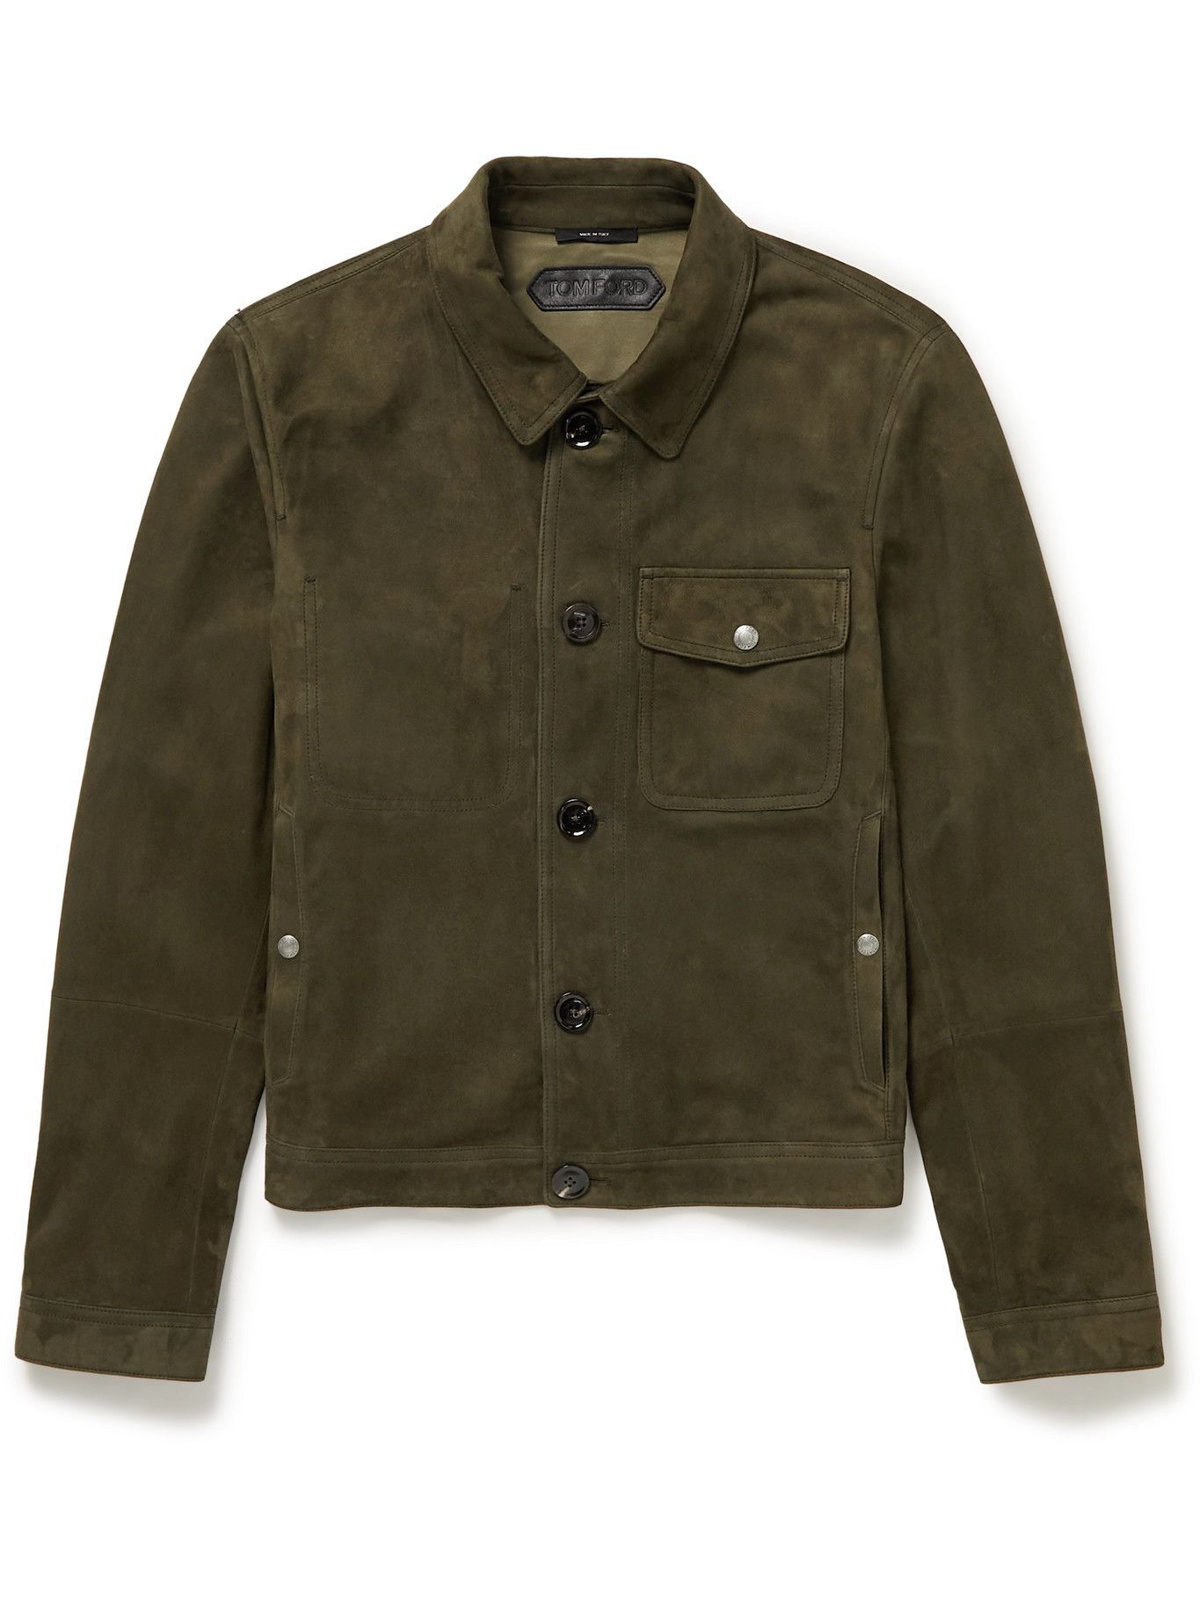 TOM FORD - Suede Overshirt - Green TOM FORD